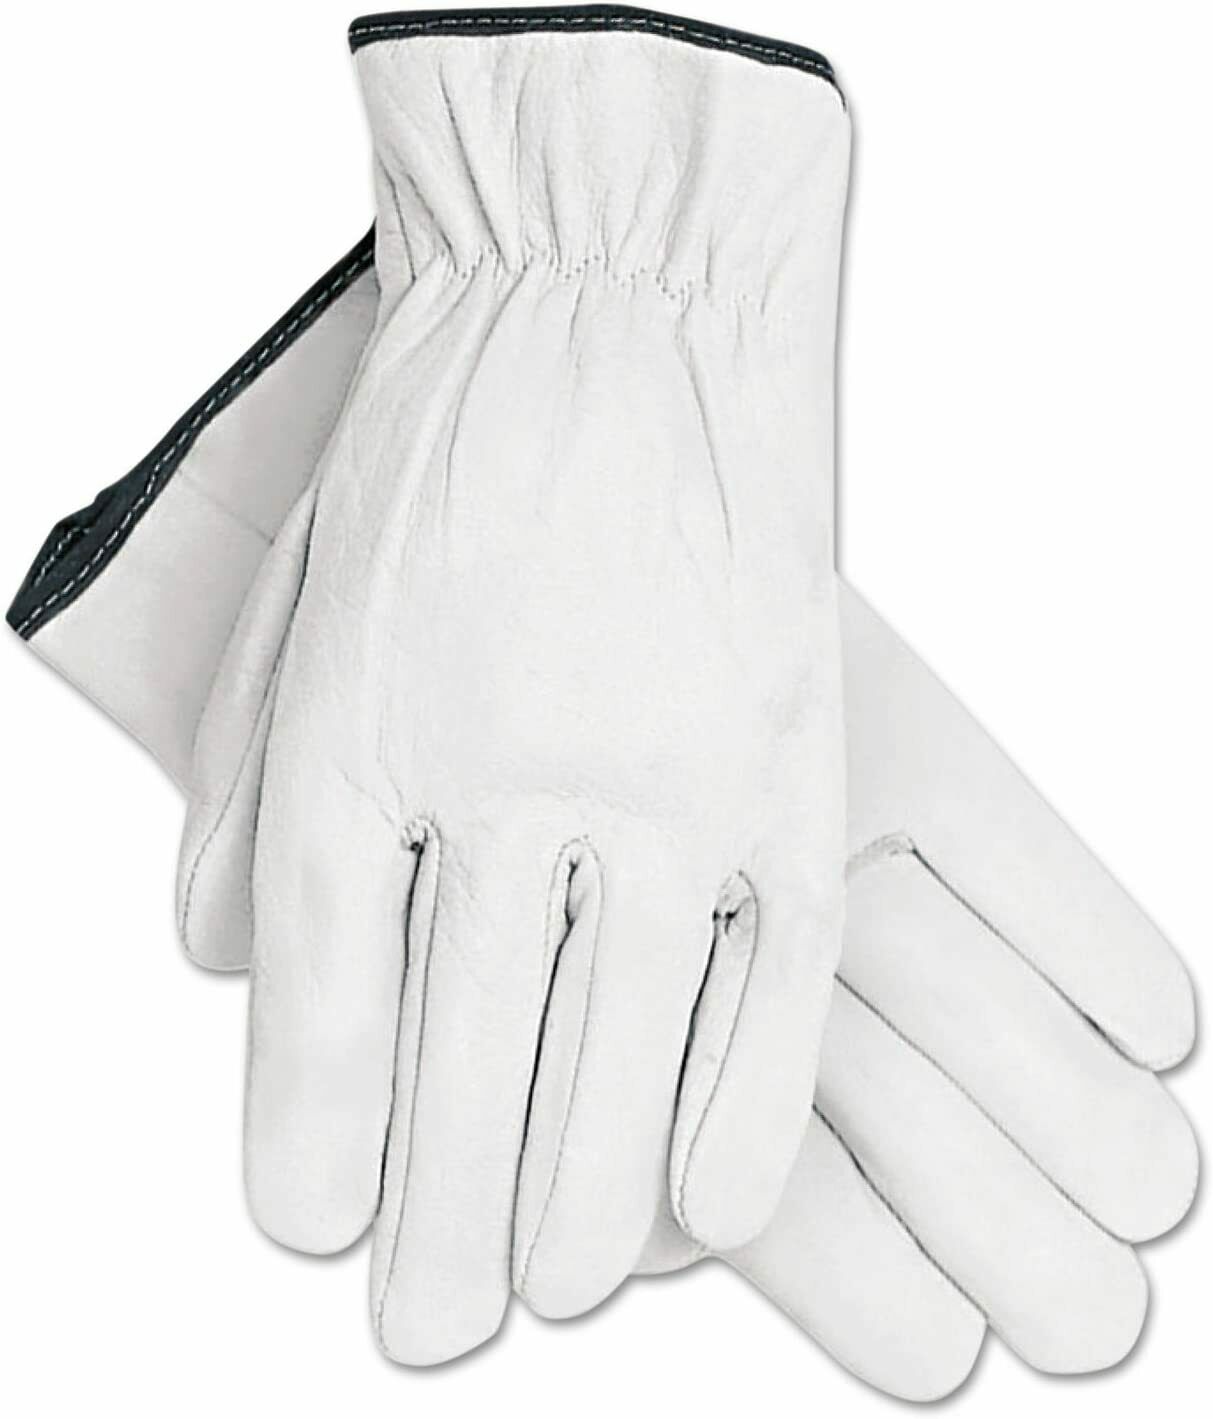 Heavy Duty Premium Cowhide Leather Work Safety Gloves Ppe S/m/l/xl 3,6or12 Pairs